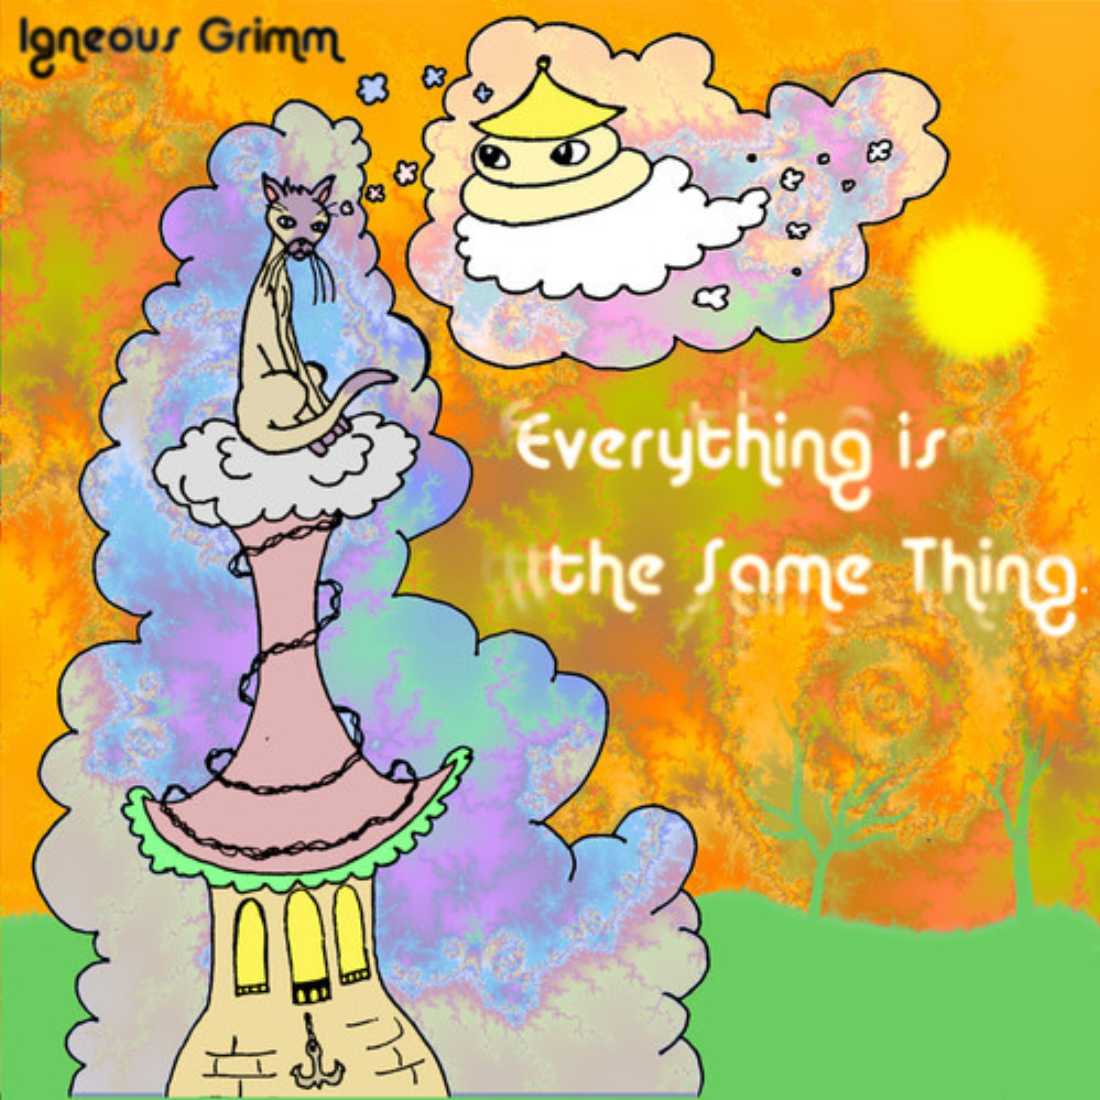 Igneous Grimm's sophomore album, Everything Is the Same Thing, is pure country-psychedelia.